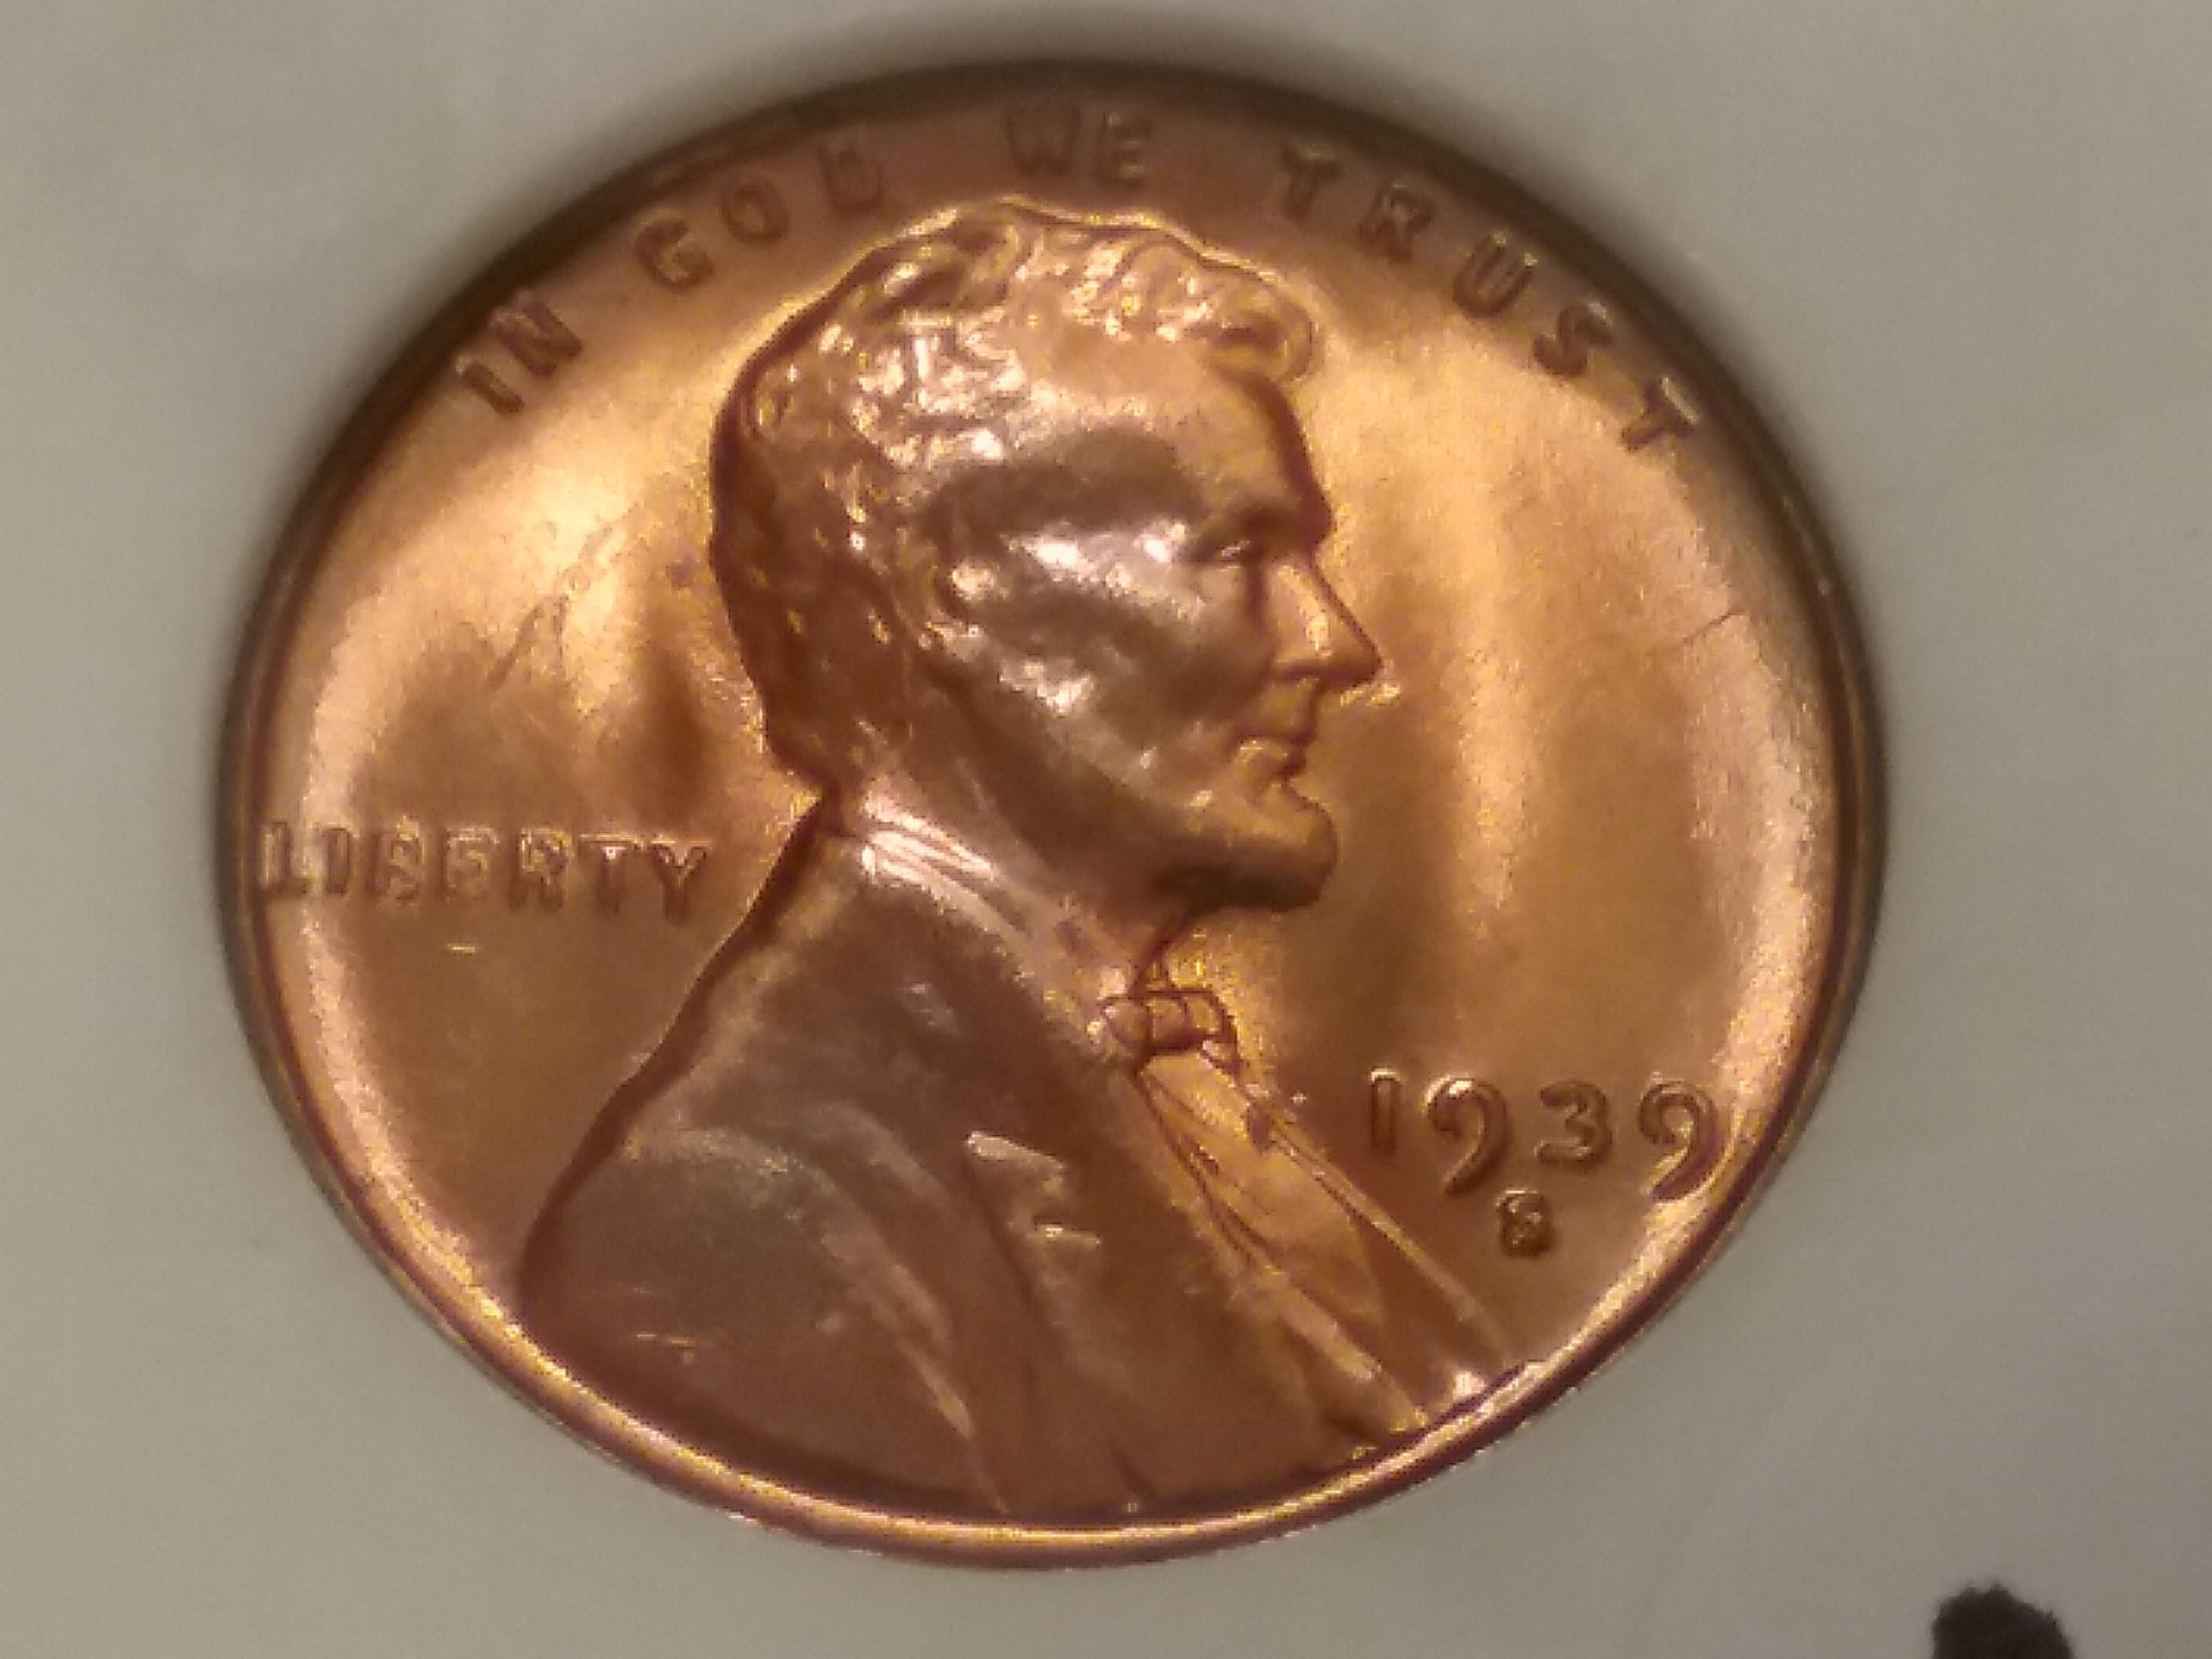 ANACS 1939-S Wheat cent in MS-66 RED